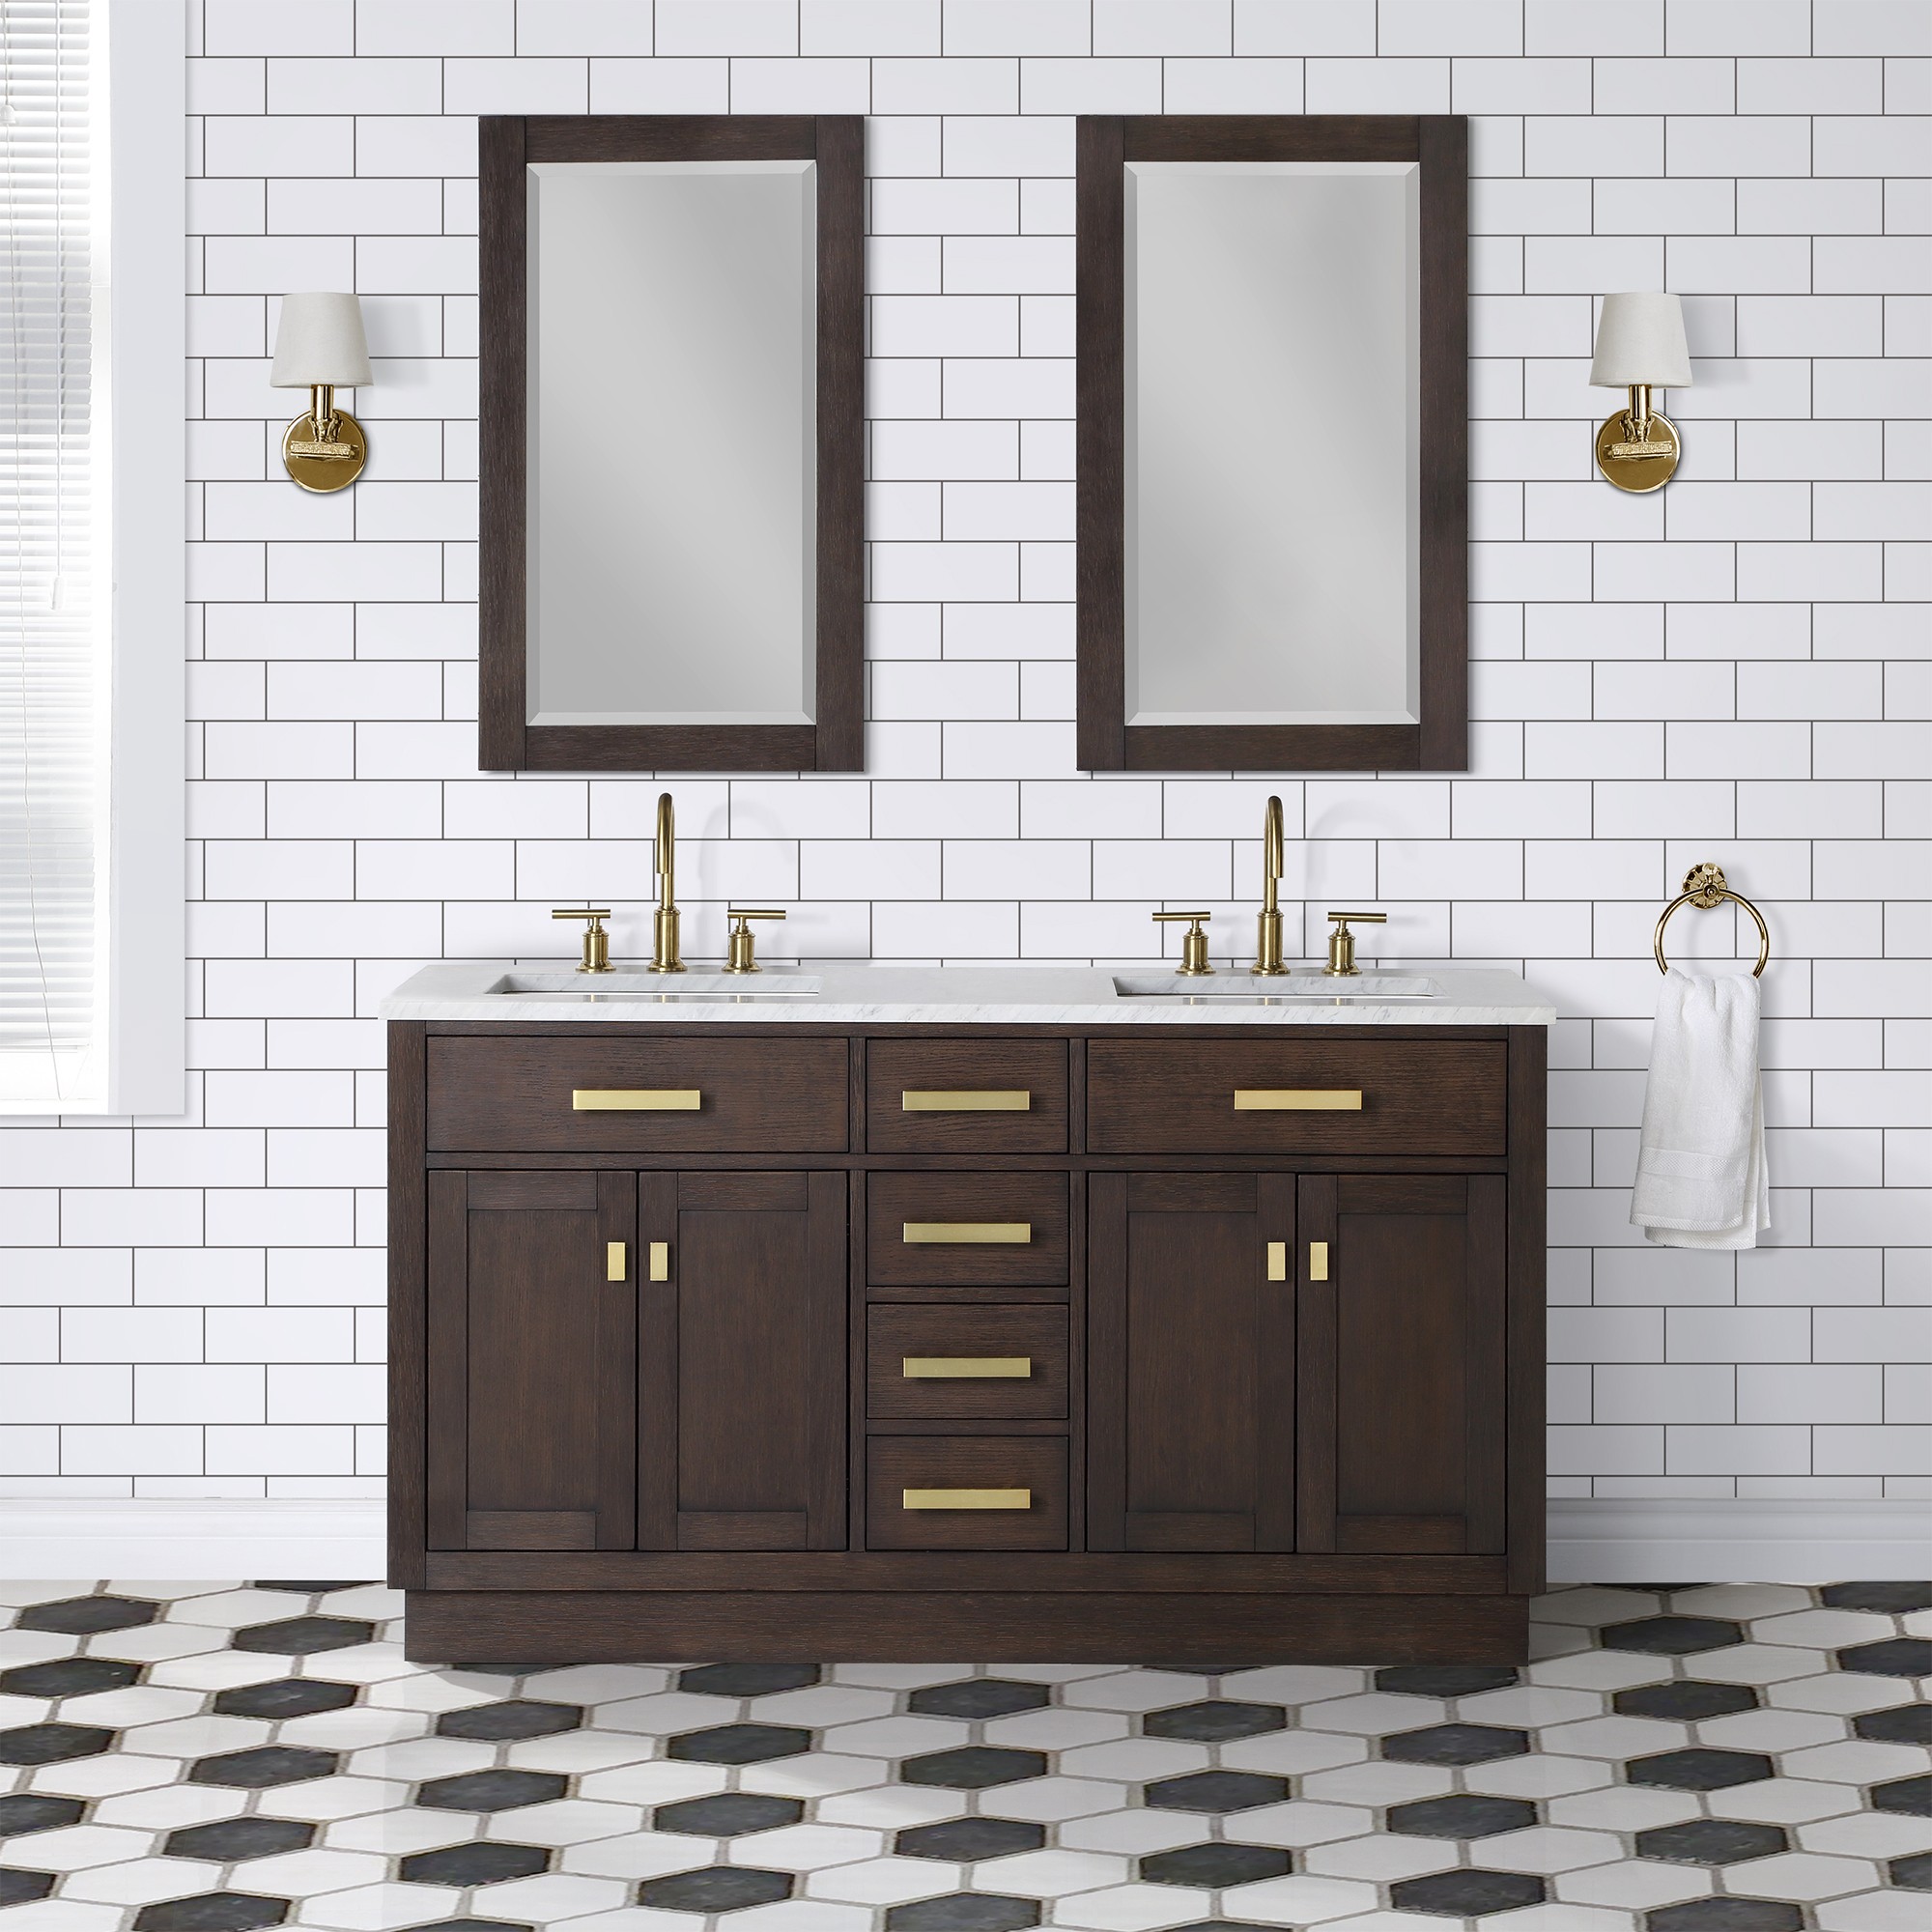 WATER-CREATION CH60CW06BK-R21BL1406 CHESTNUT 60 INCH DOUBLE BATHROOM VANITY WITH MIRRORS IN BROWN OAK